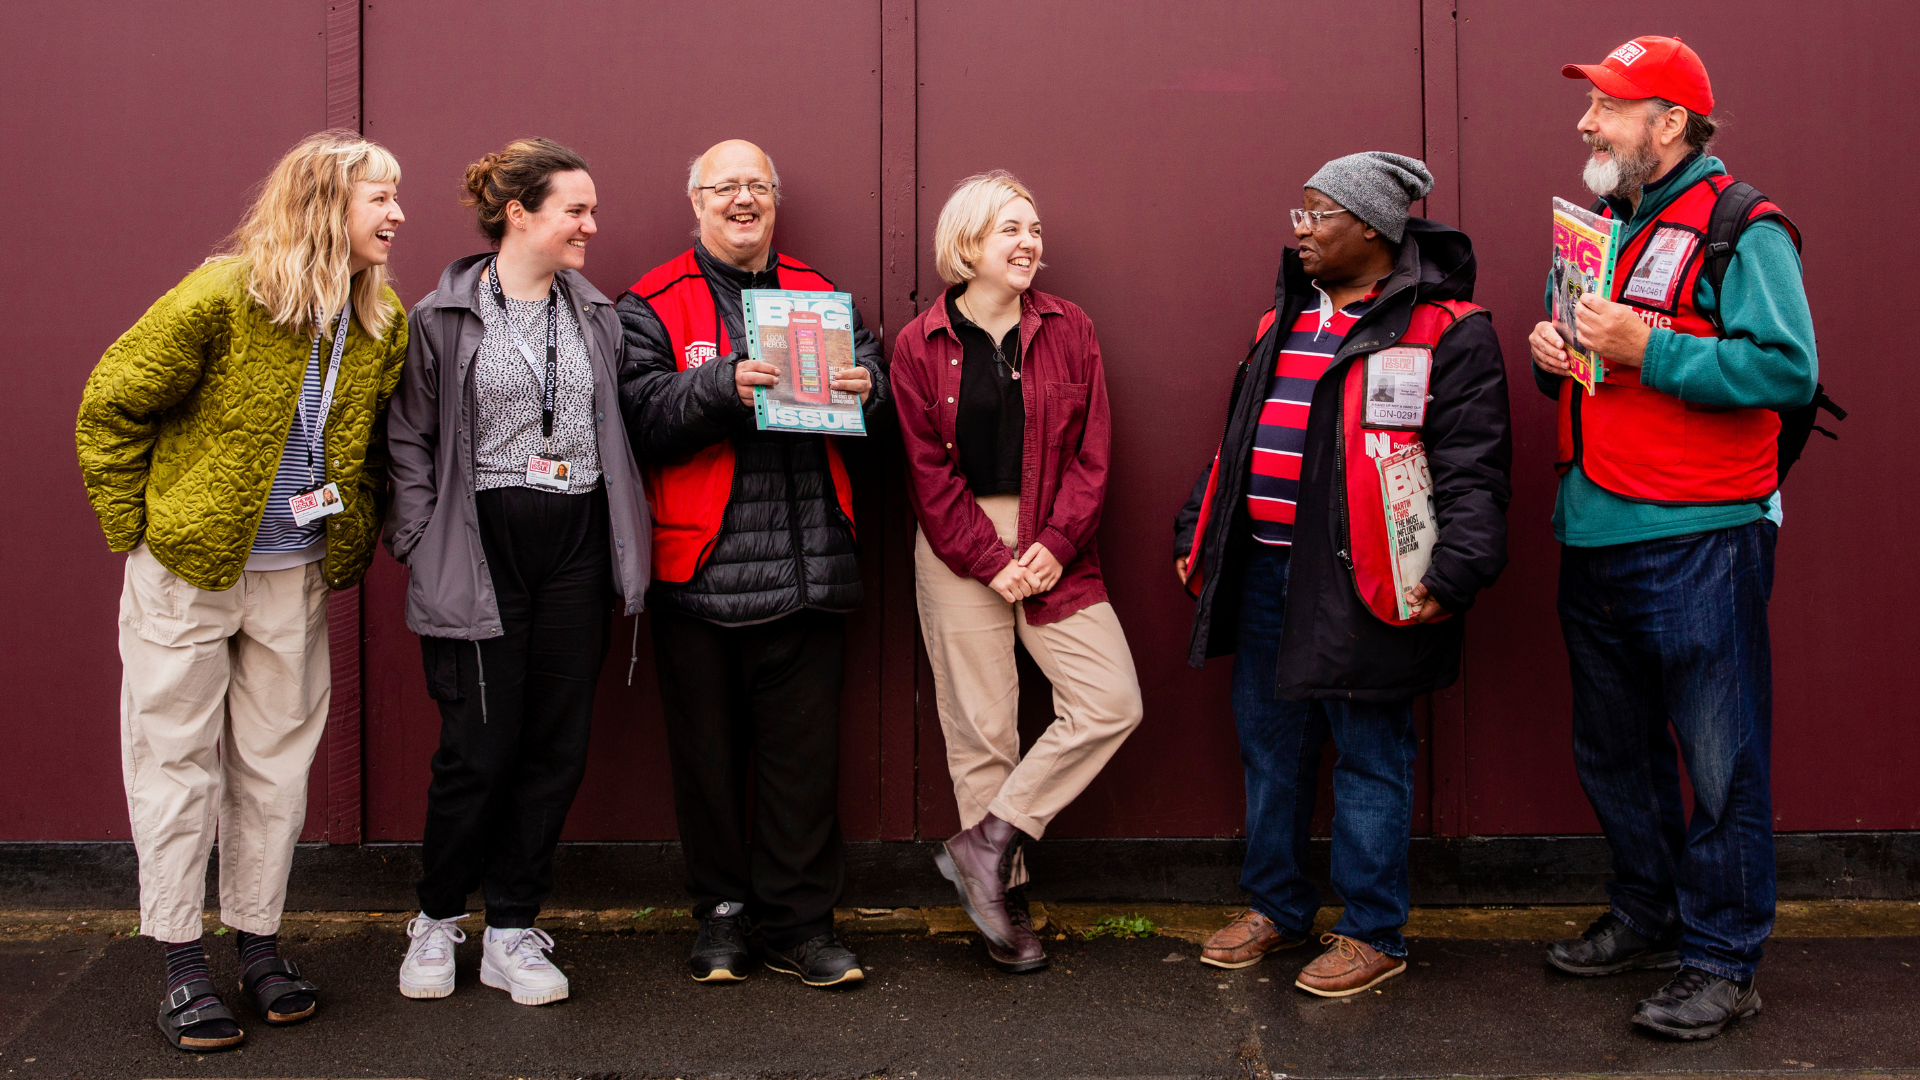 Frontline staff with Big Issue Vendors